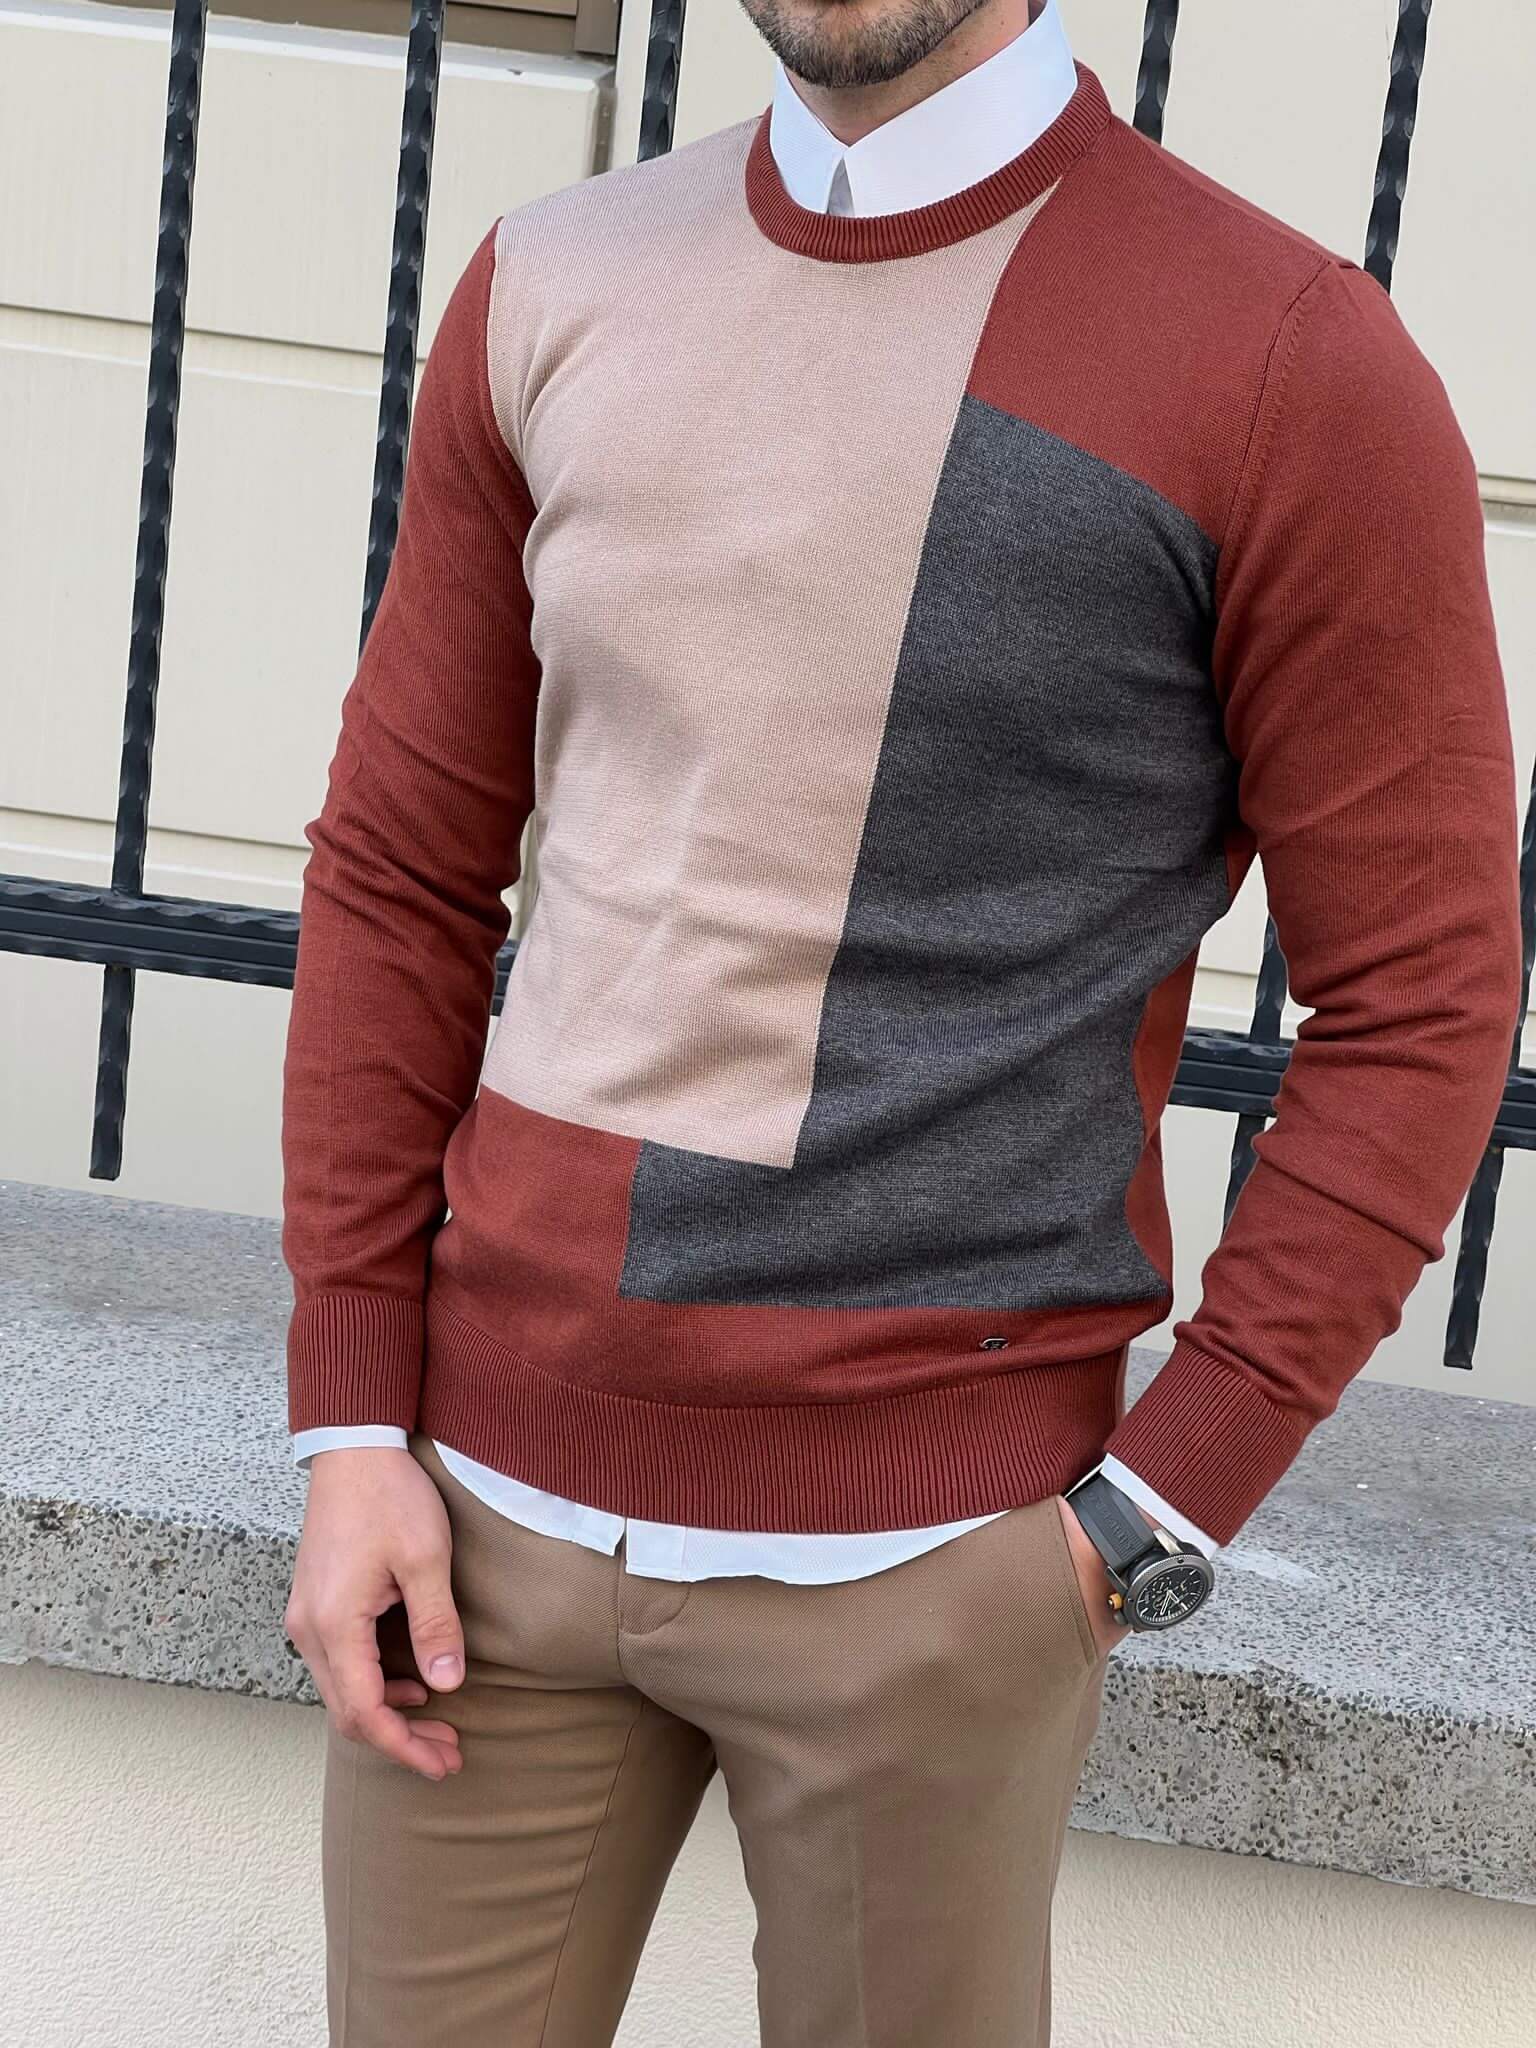 A cozy crewneck sweater with a vibrant pattern of tiles